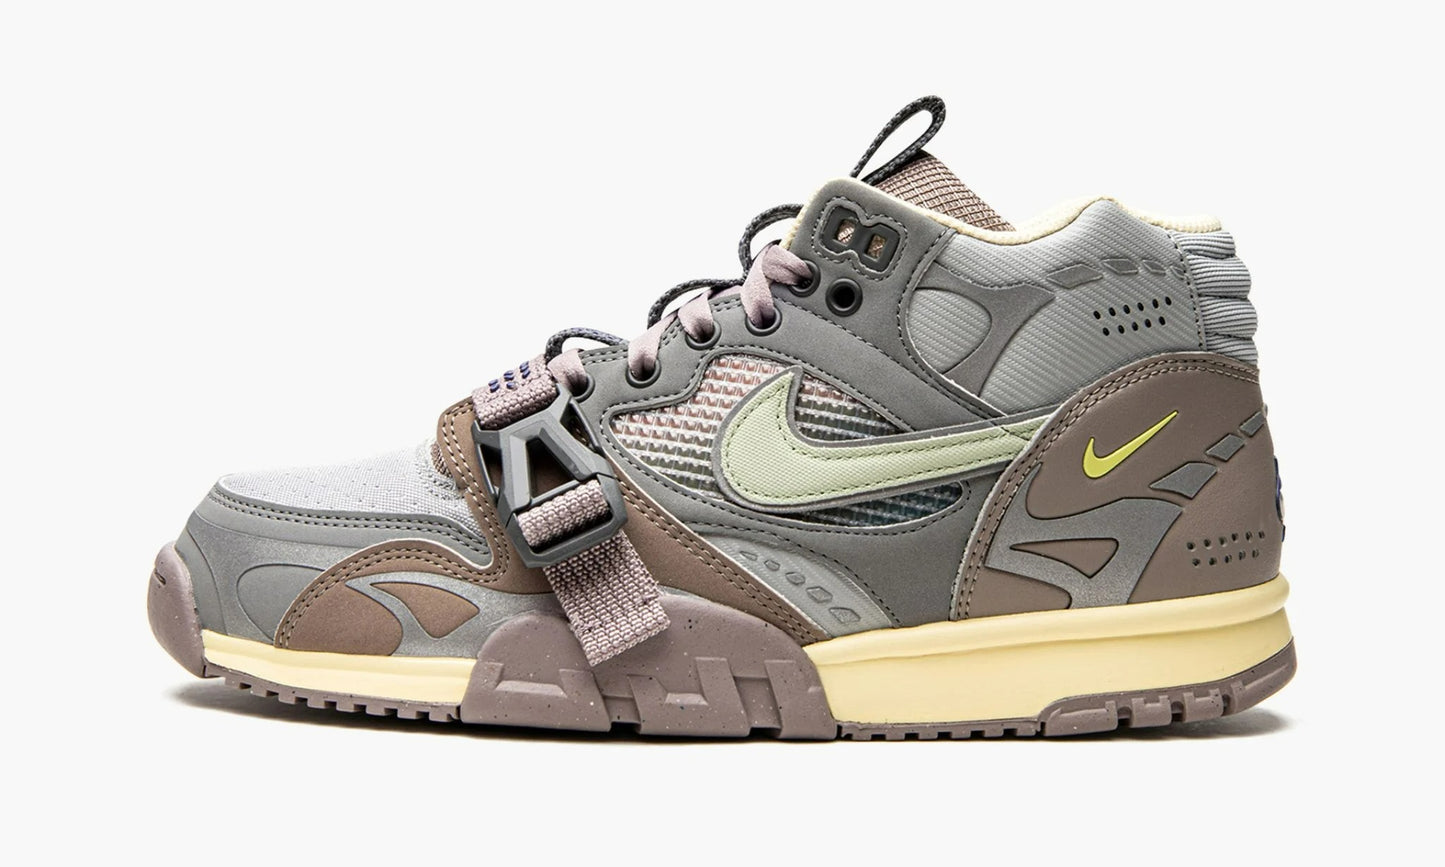 Air Trainer 1 Utility Light Smoke Grey - DH7338 002 | The Sortage